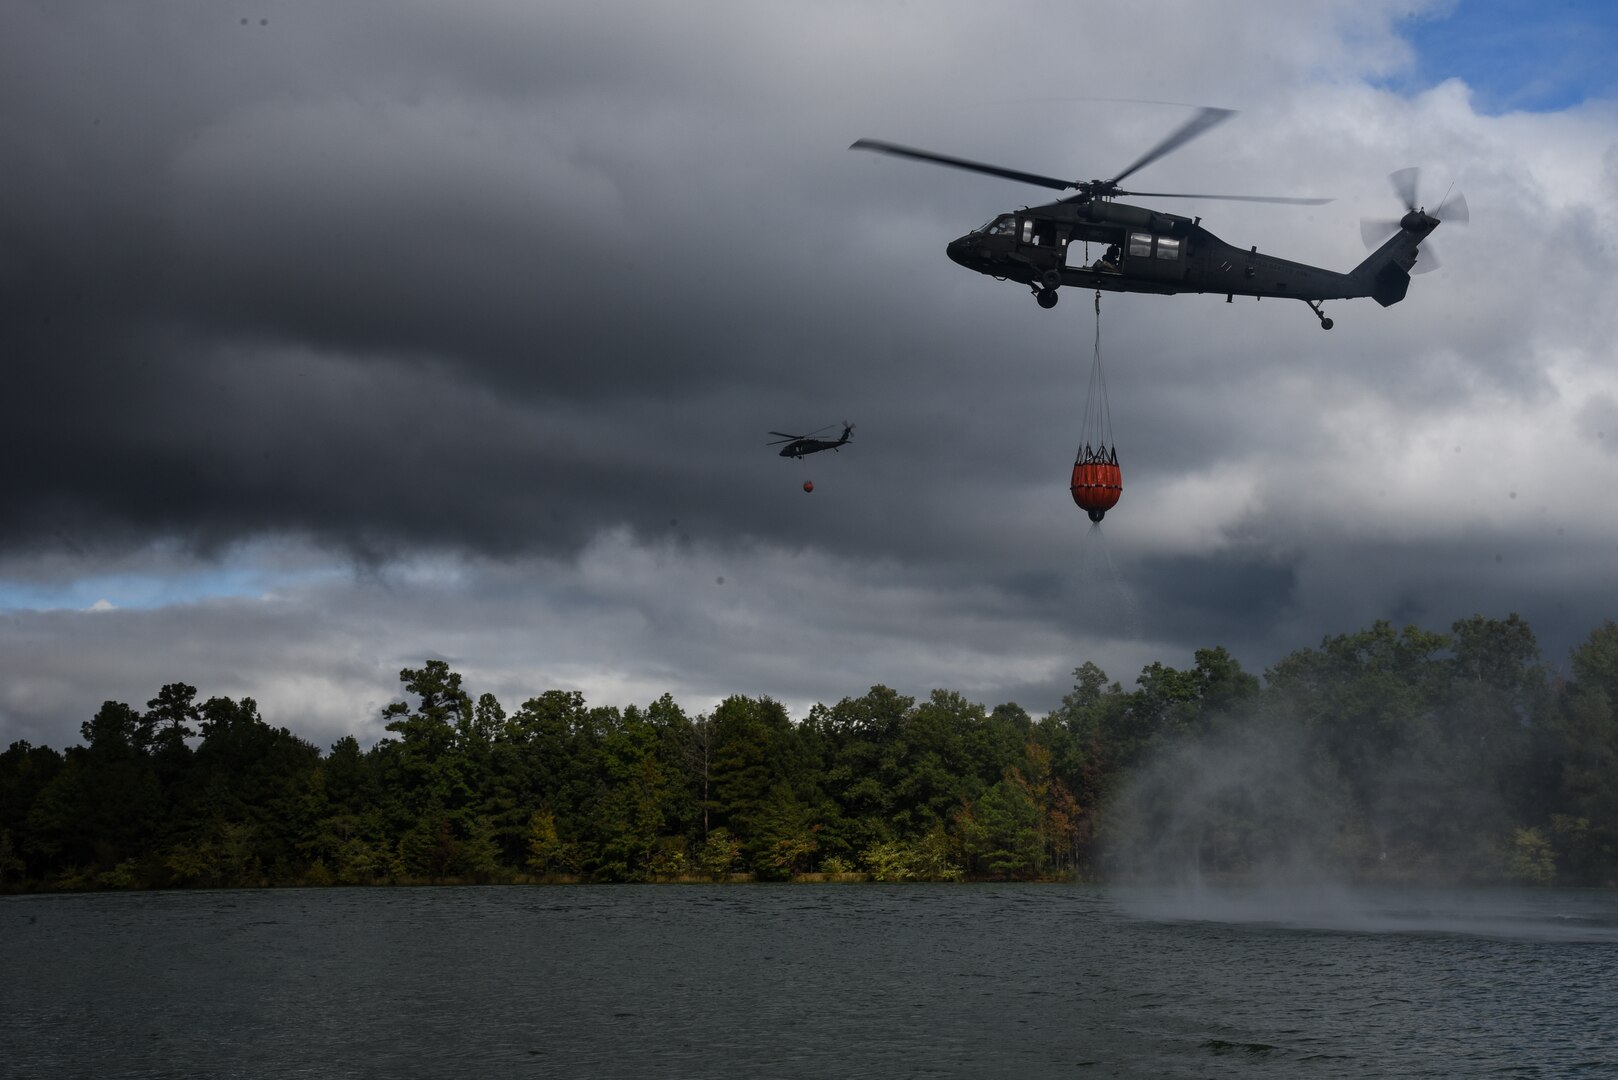 Virginia Army National Guard flight crews conduct water bucket training with UH-60 Black Hawk helicopters Oct. 12, 2021, at a training area in Chesterfield, Virginia. Aviation assets can support fire-fighting efforts with the use of water buckets, which require periodic training for flight crews in order to ensure equipment proficiency. These Soldiers are scheduled to deploy to Kosovo with the Sandston-based 2nd Battalion, 224th Aviation Regiment, 29th Infantry Division in early 2022, where fire-fighting capabilities may be needed. (U.S. Army National Guard photo by Sgt. 1st Class Terra C. Gatti)